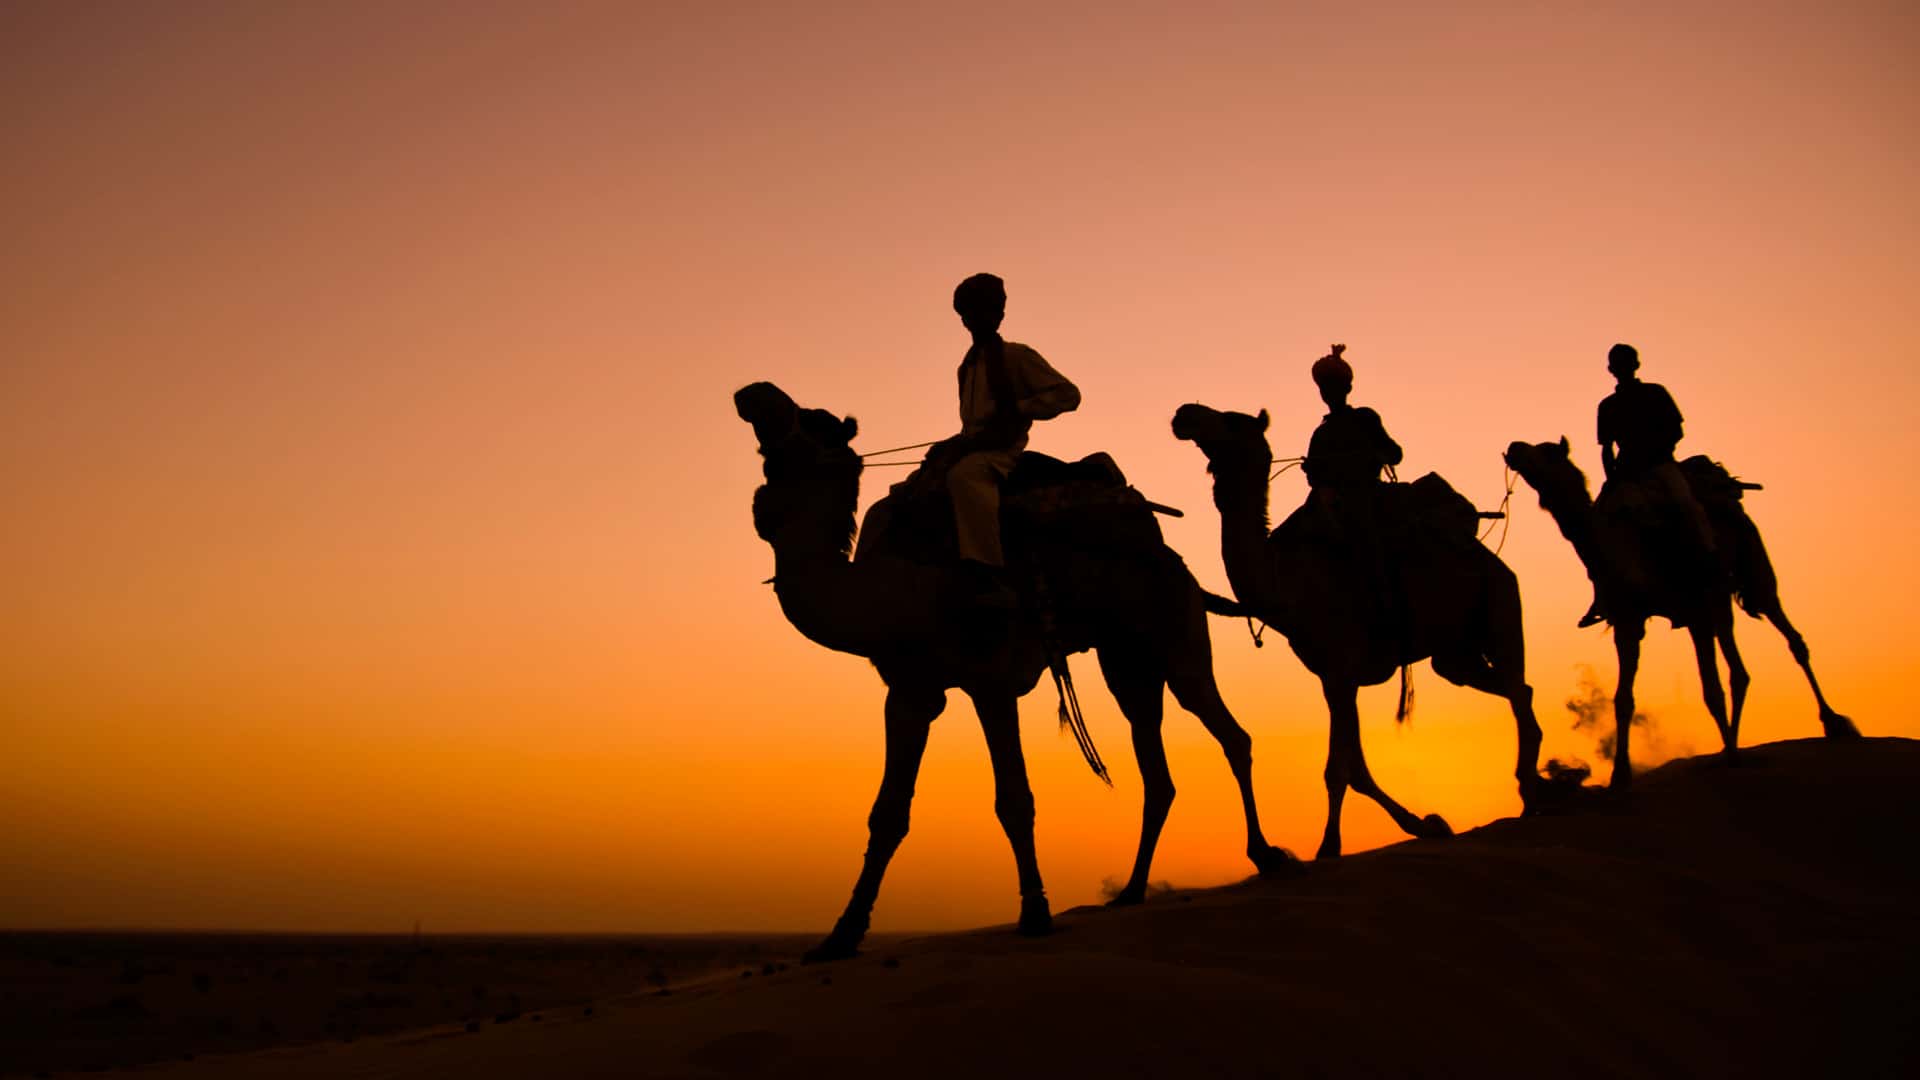 Best Things To Do In Rajasthan For An Amazing Desert Vacation.